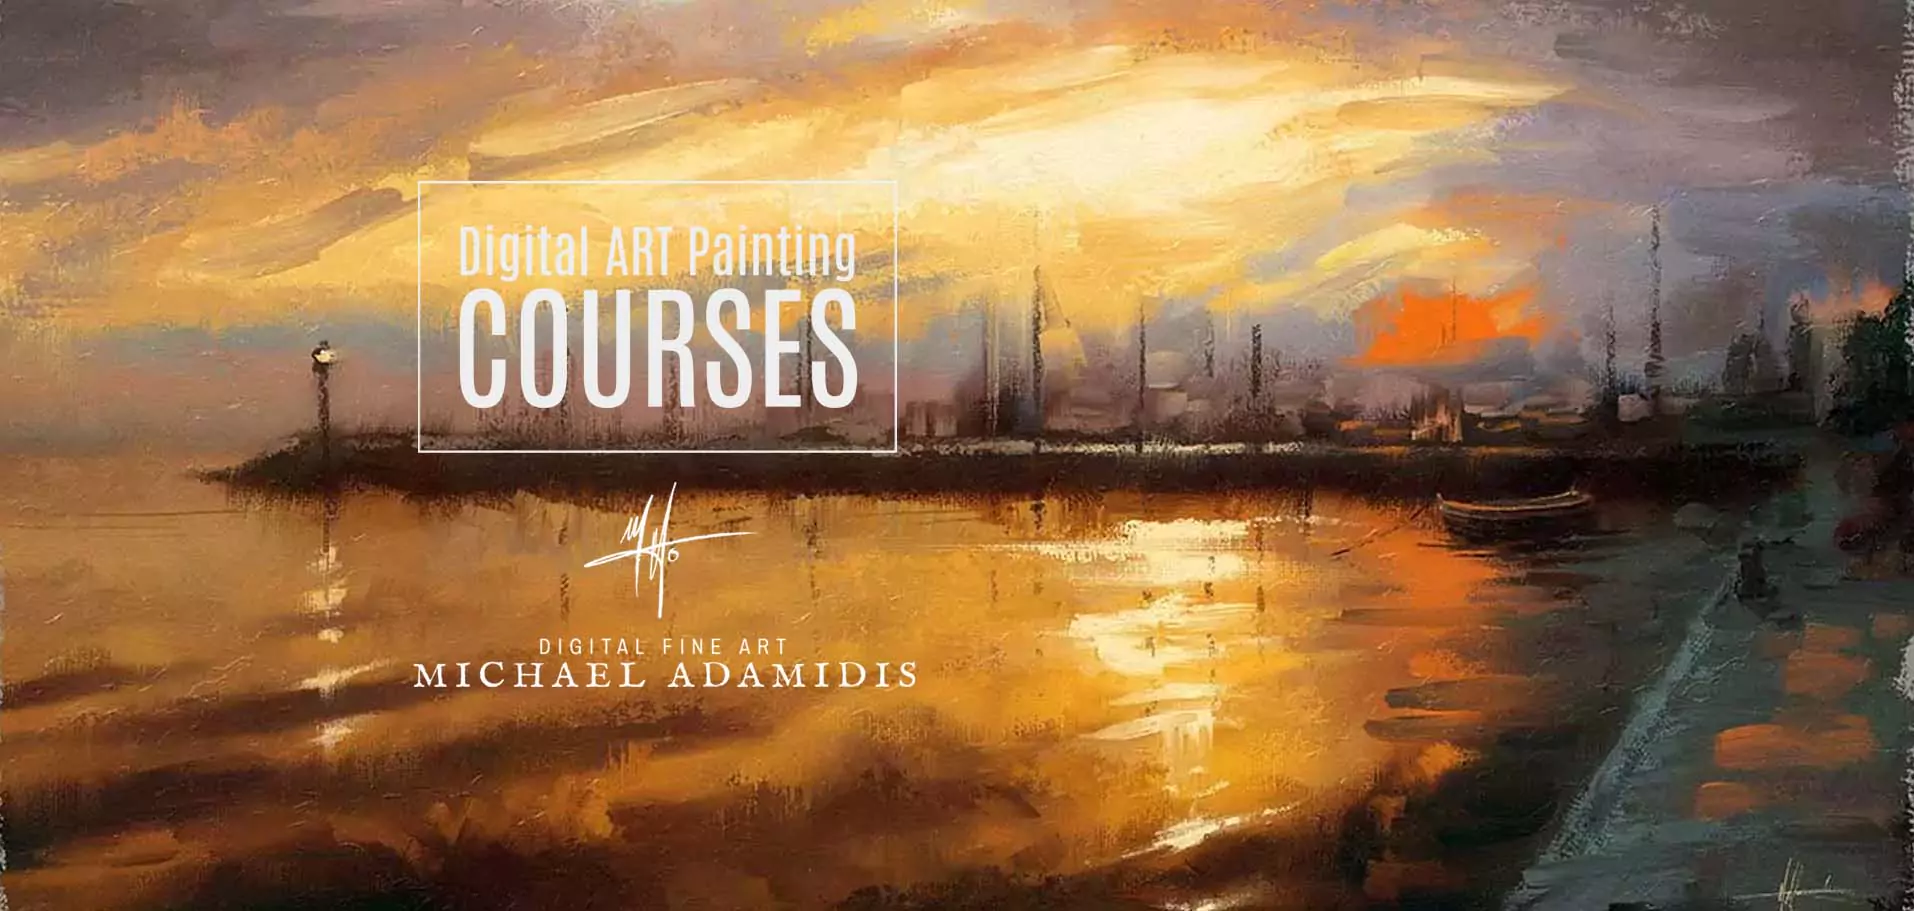 Digital ART Painting and Brushes Courses